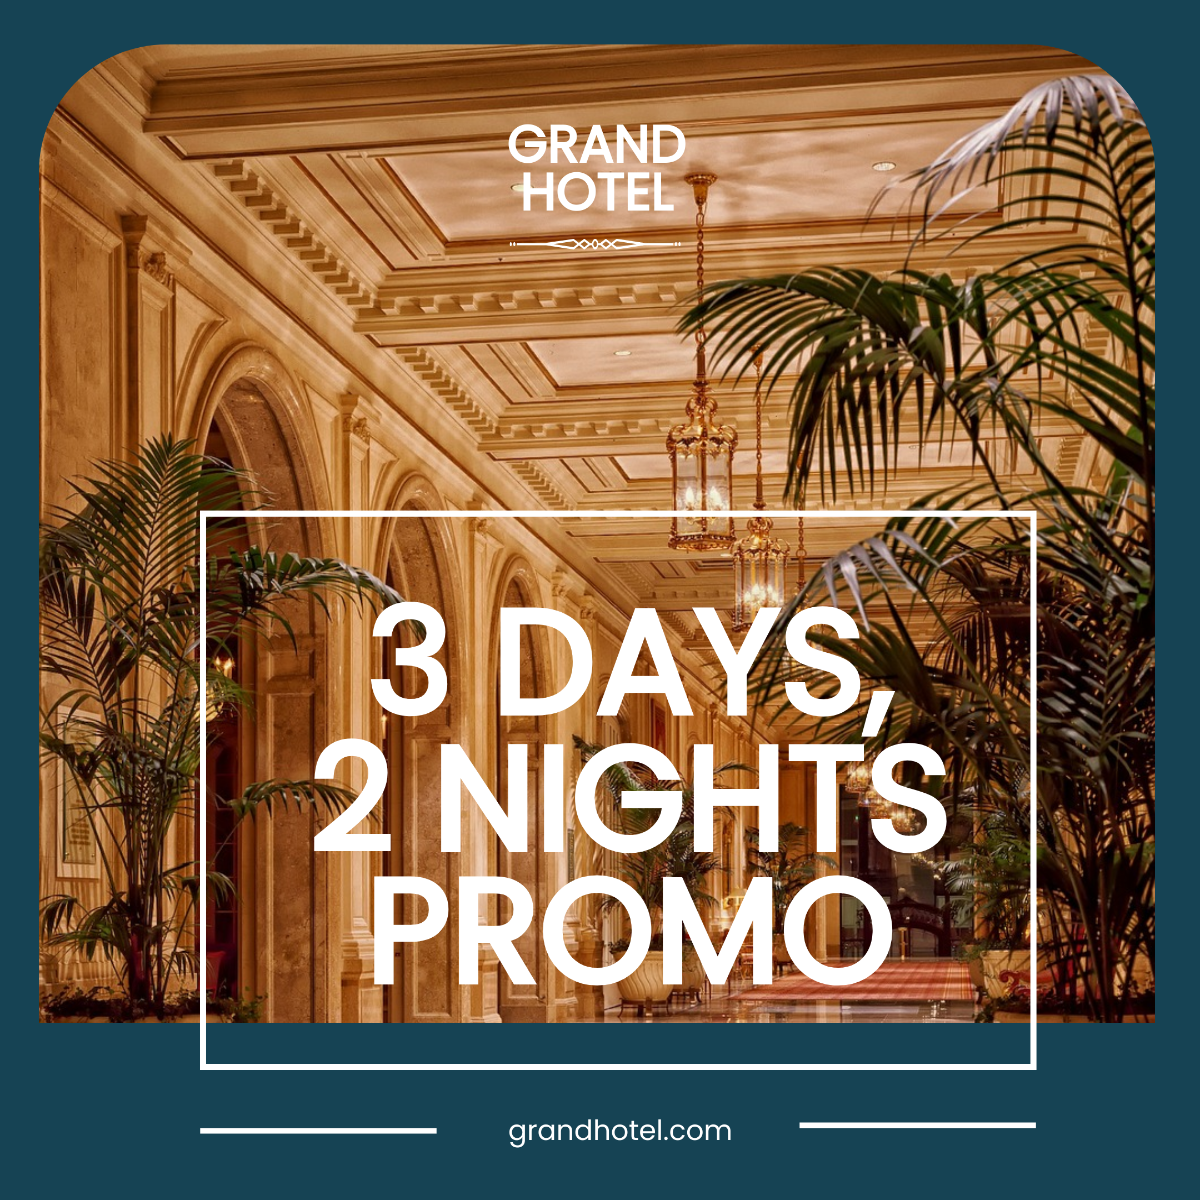 Hotel Instagram Feed Ad Template